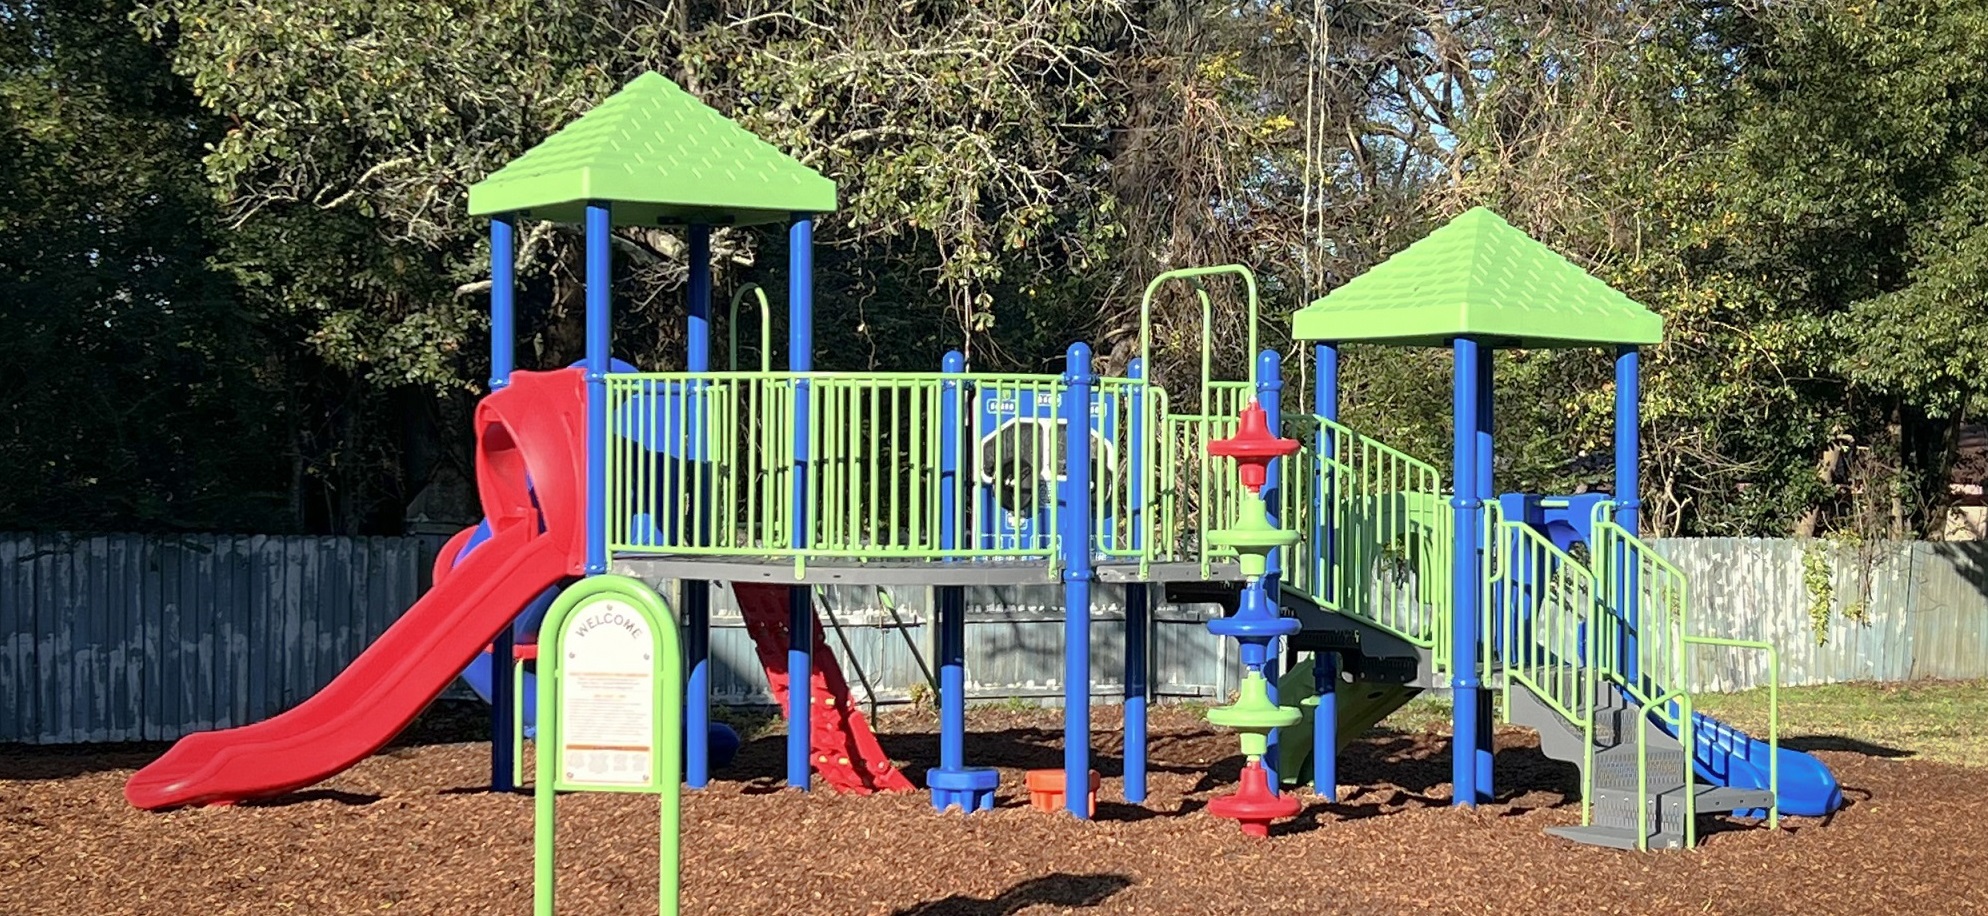 Make An Impact Foundation Opens New Playground in Toulminville